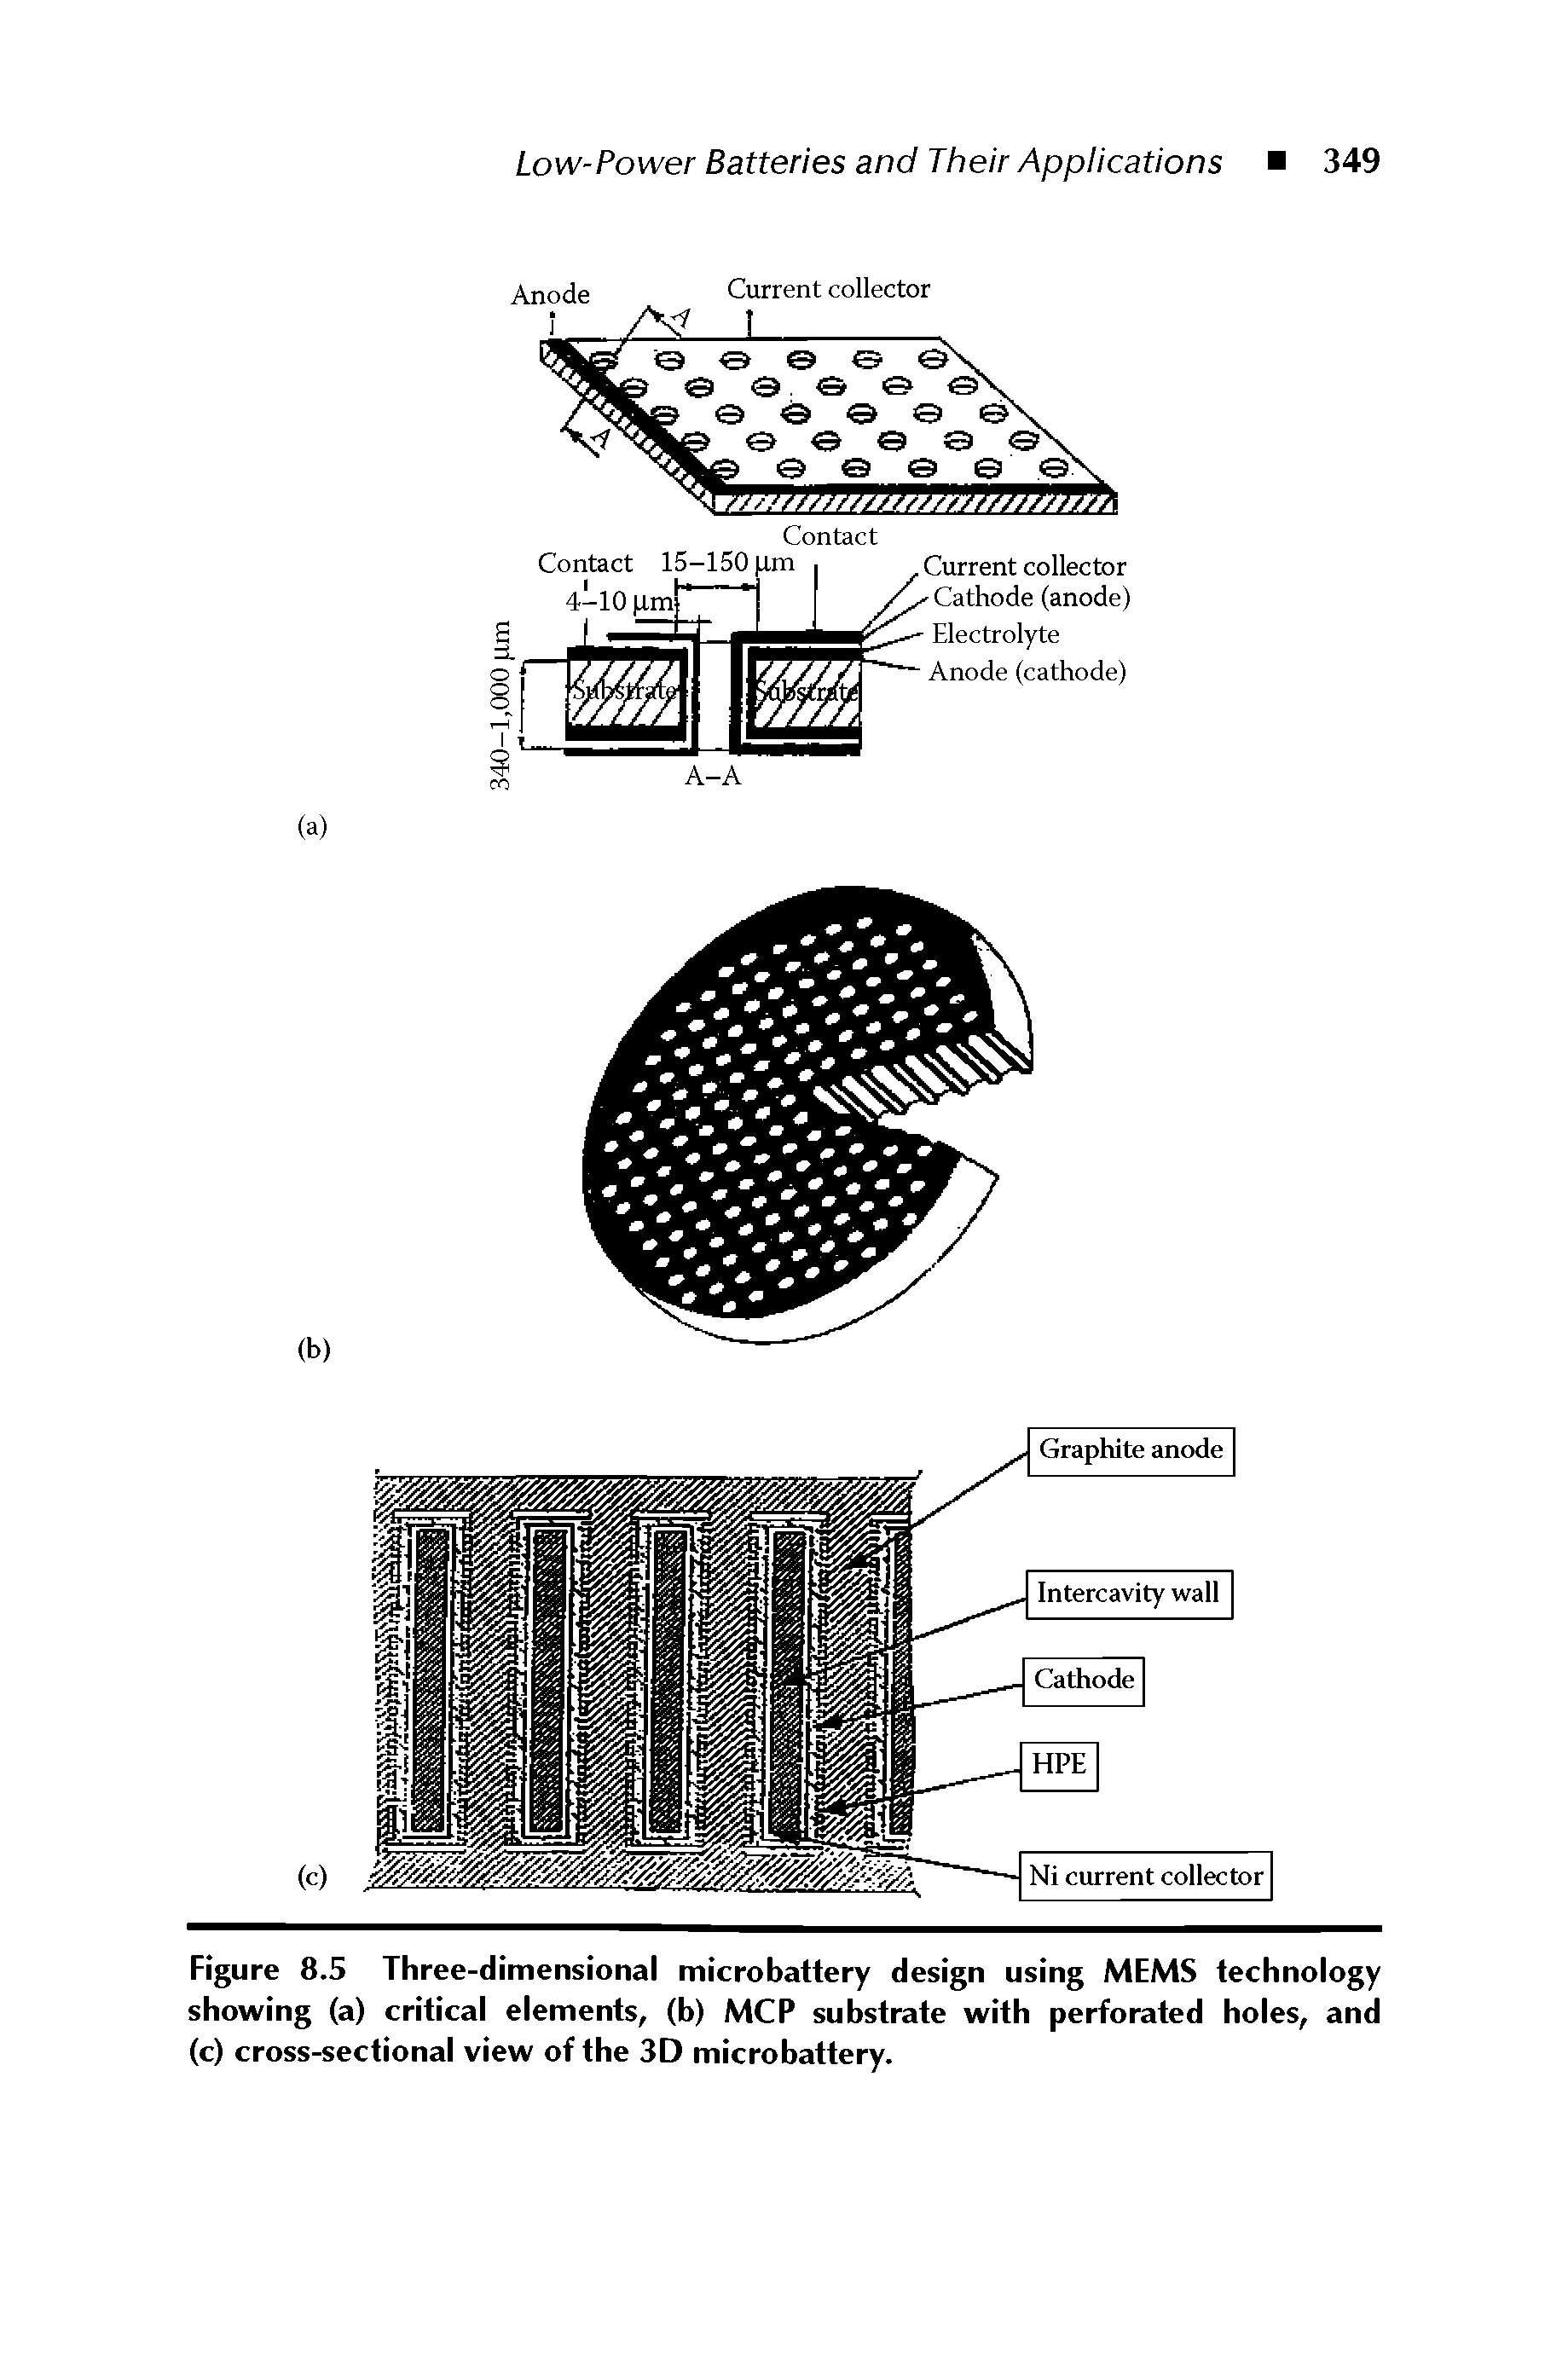 Figure 8.5 Three-dimensional microbattery design using MEMS technology showing (a) critical elements, (b) MCP substrate with perforated holes, and (c) cross-sectional view of the 3D microbattery.